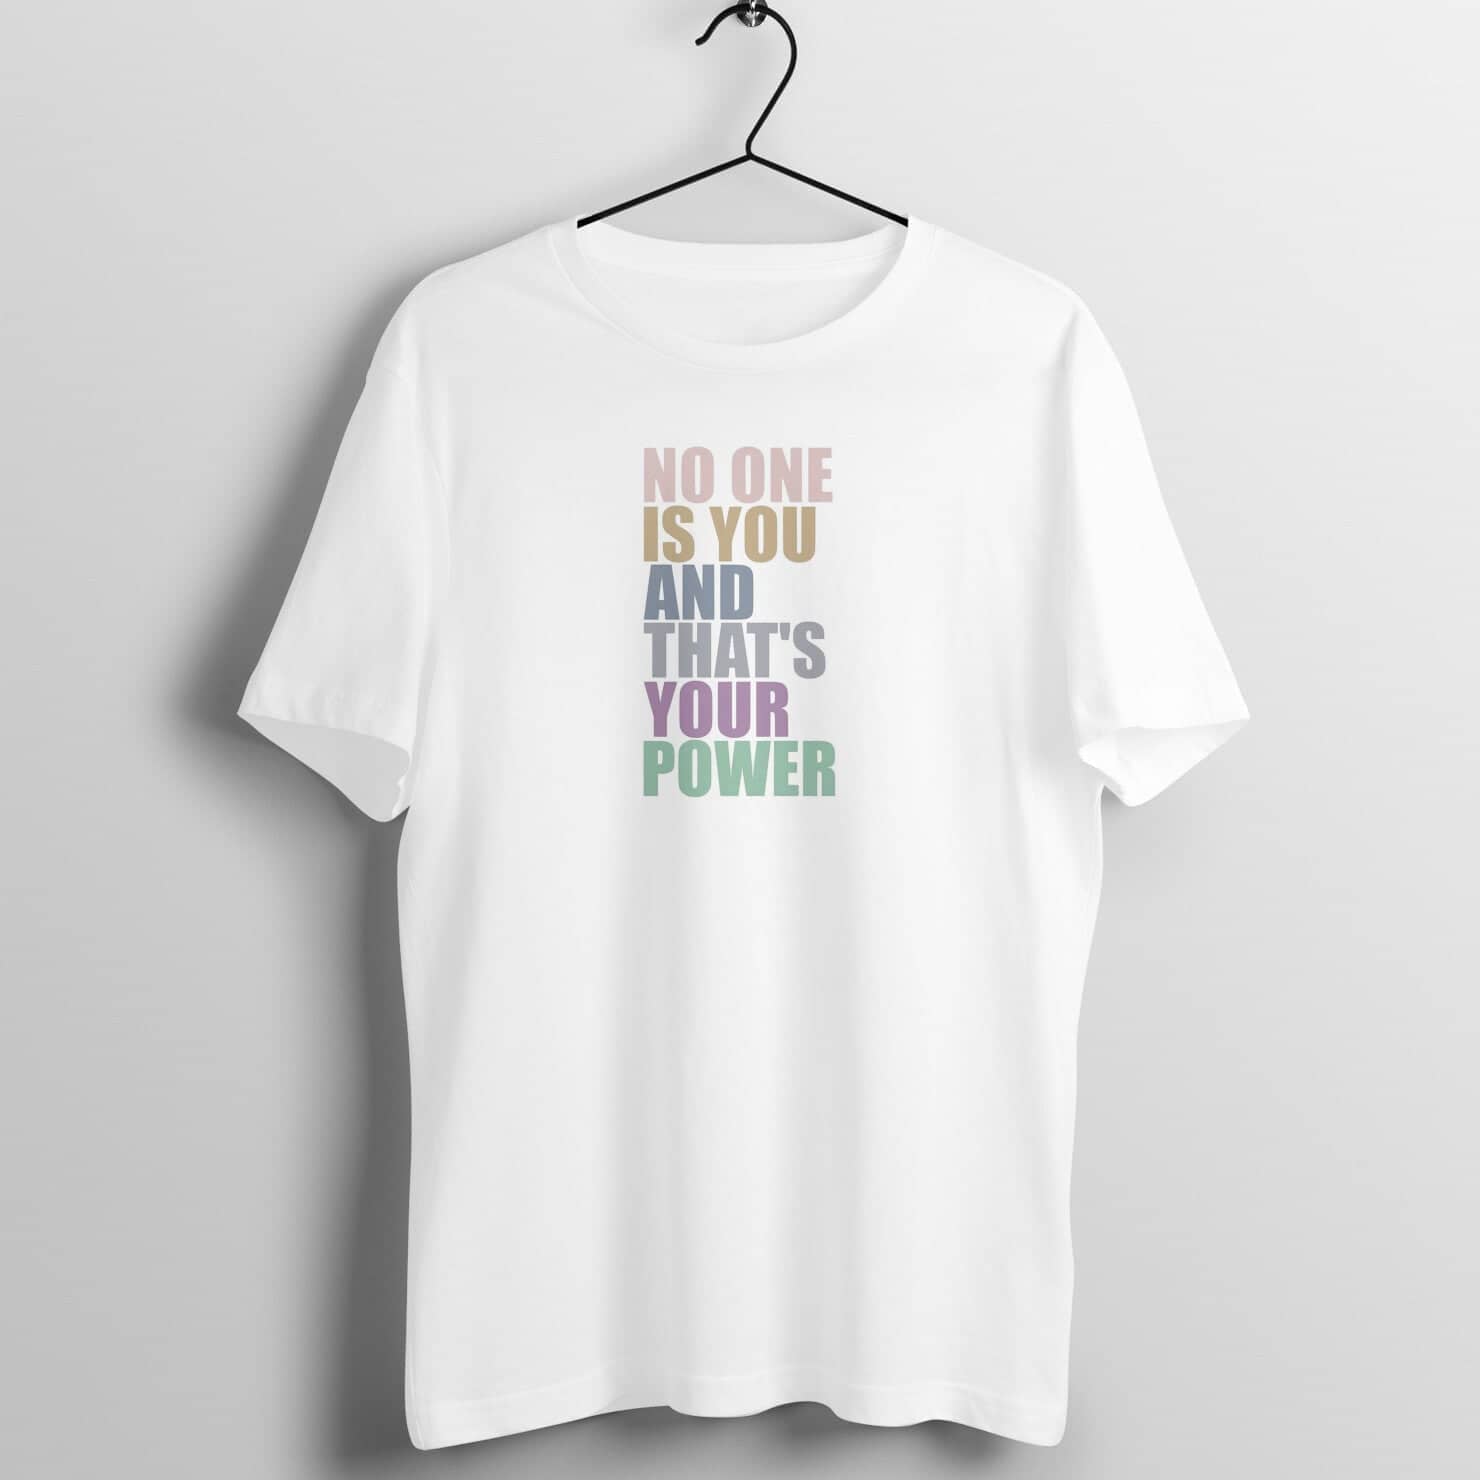 No One is You and That's Your Power Supreme White T Shirt for Women and Men freeshipping - Catch My Drift India